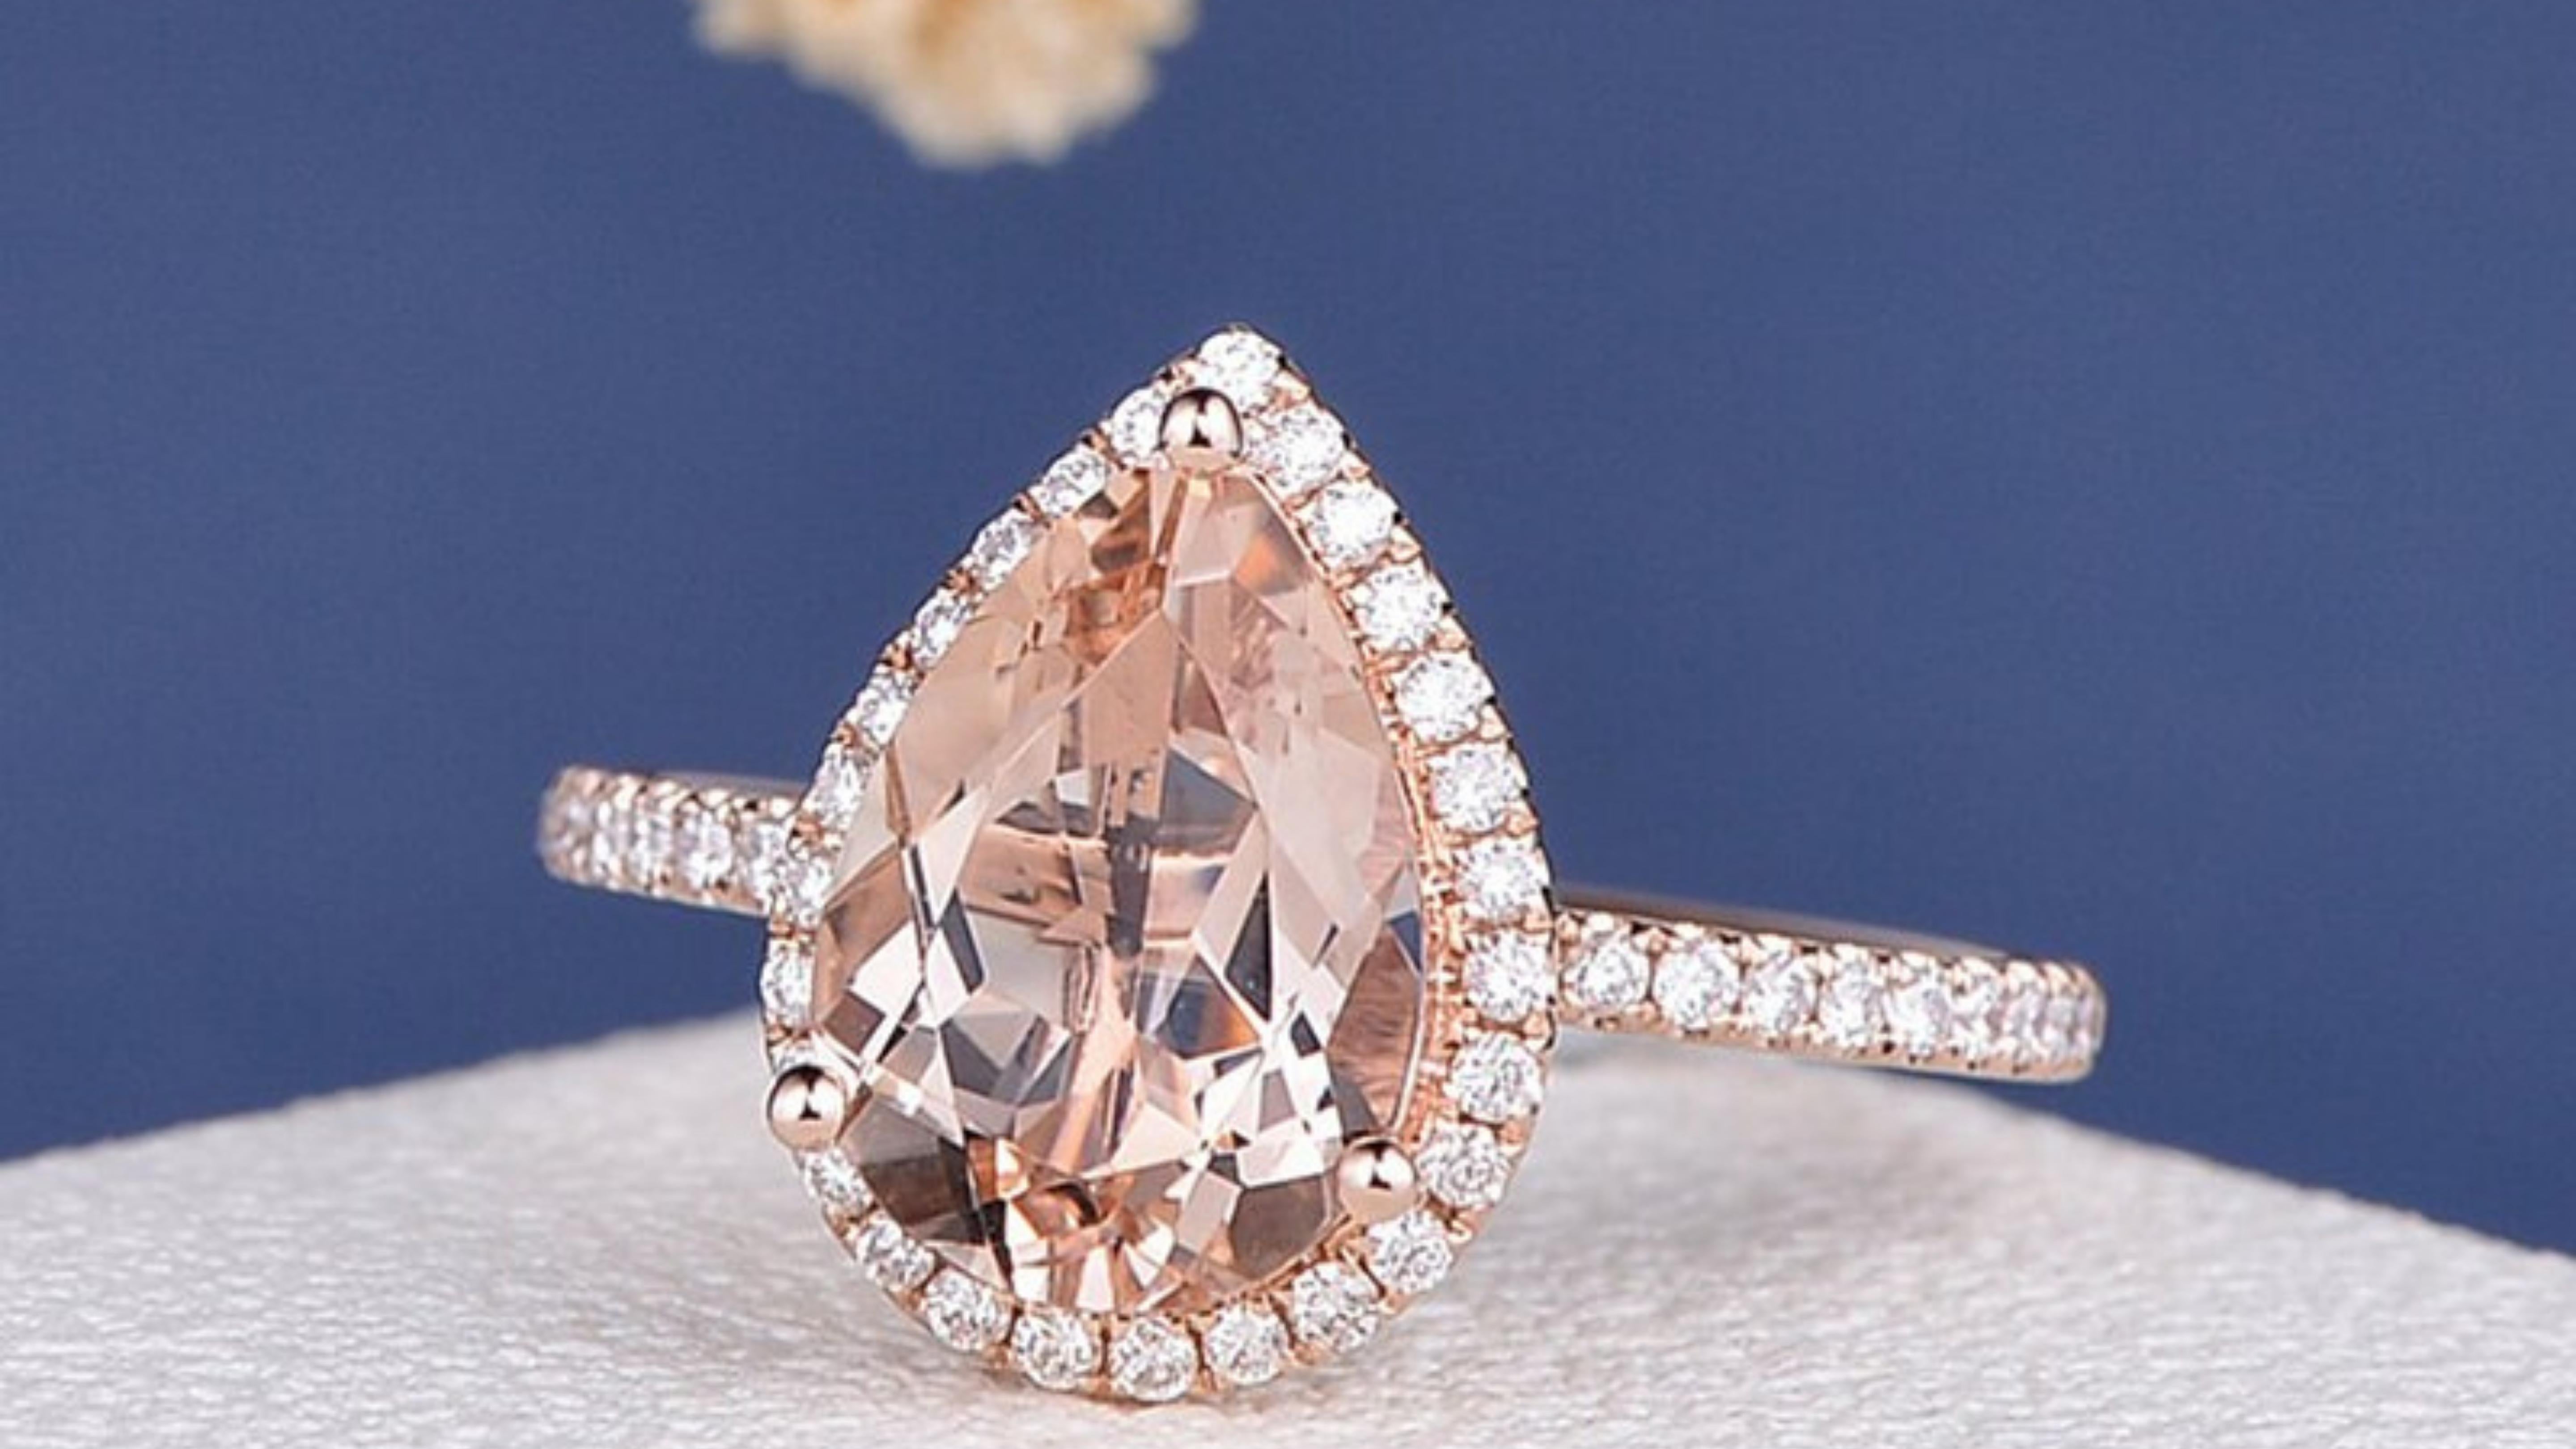 This Pink Morganite Ring stands out with the moissanite stones set in 14k Rose Gold 

Following the discovery of a new locality for rose beryl in Madagascar in 1910, George Kunz proposed the name morganite at a meeting of the New York Academy of